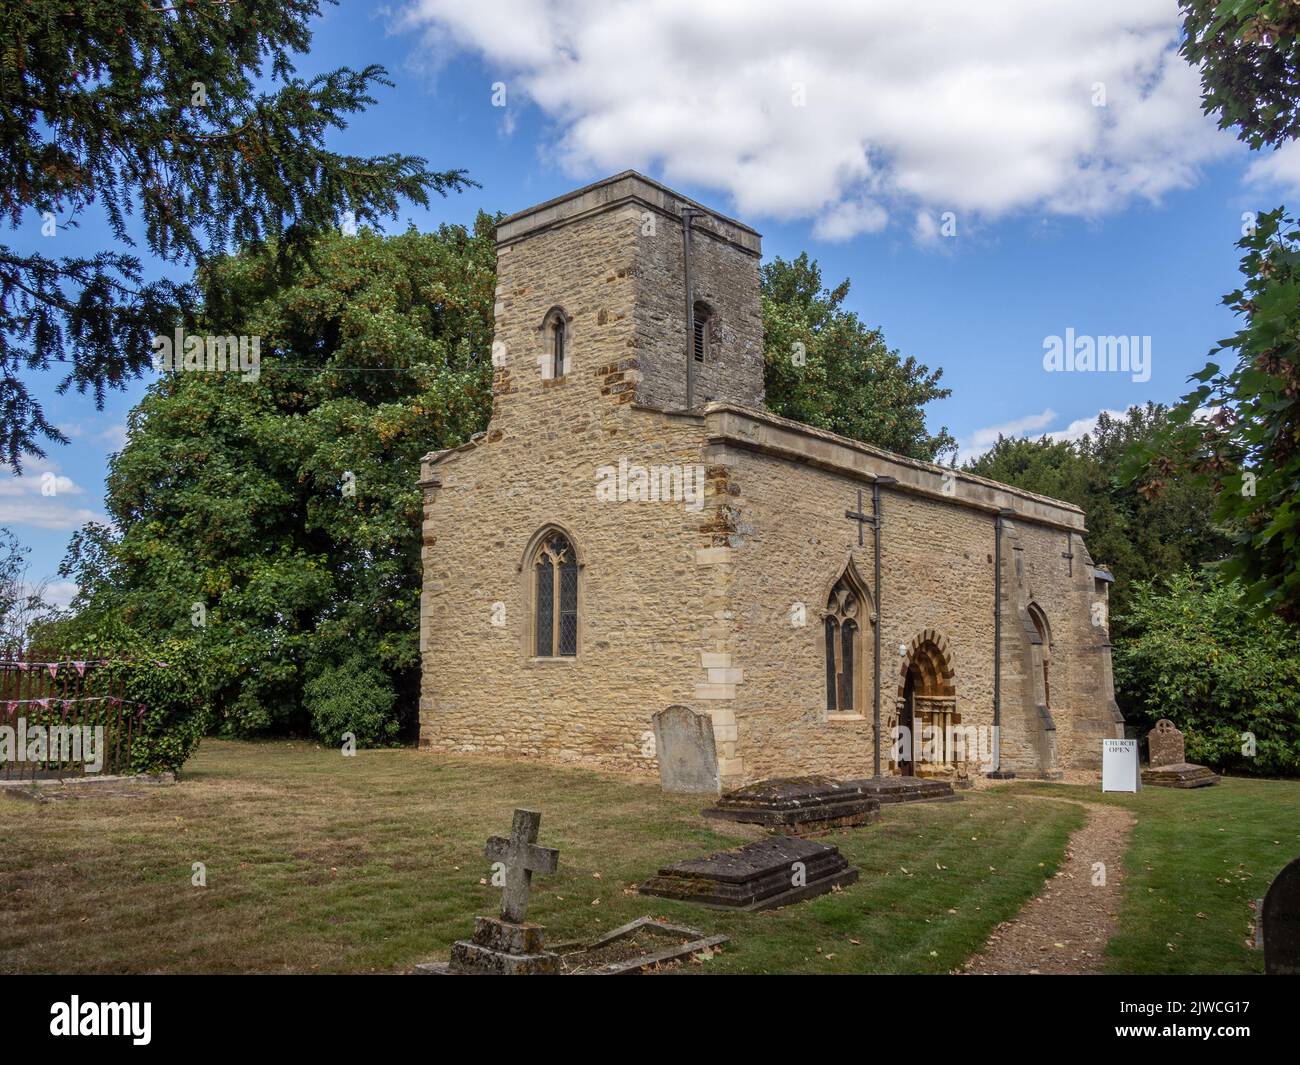 The Medieval church of St Michaels and All Angels in the village of Farndish, Bedfordshire, UK; dates from around 1200 with a 15th century tower. Stock Photo